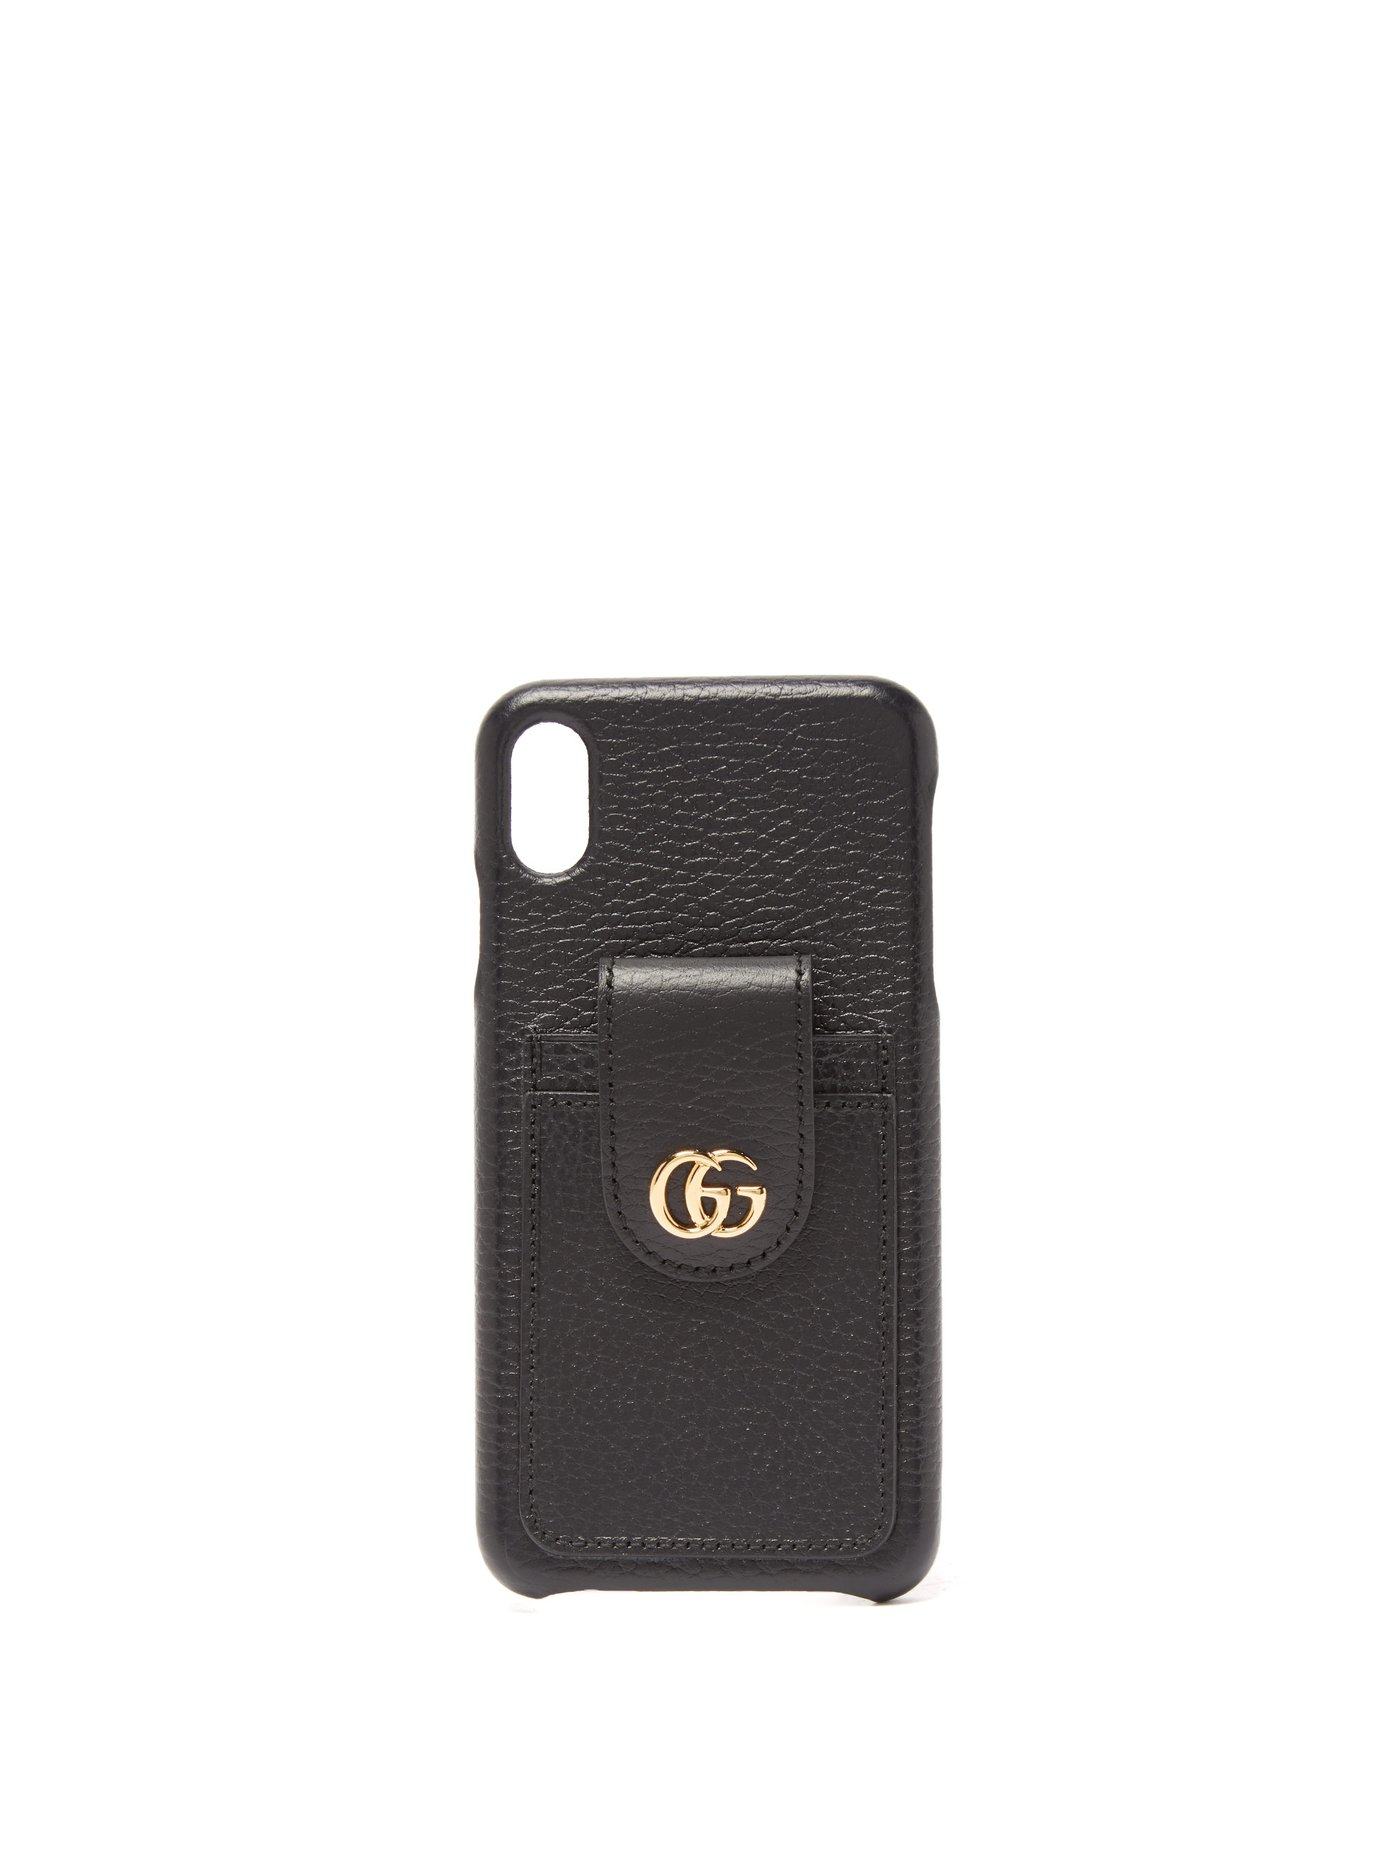 GG-plaque leather iPhone® XS Max phone 